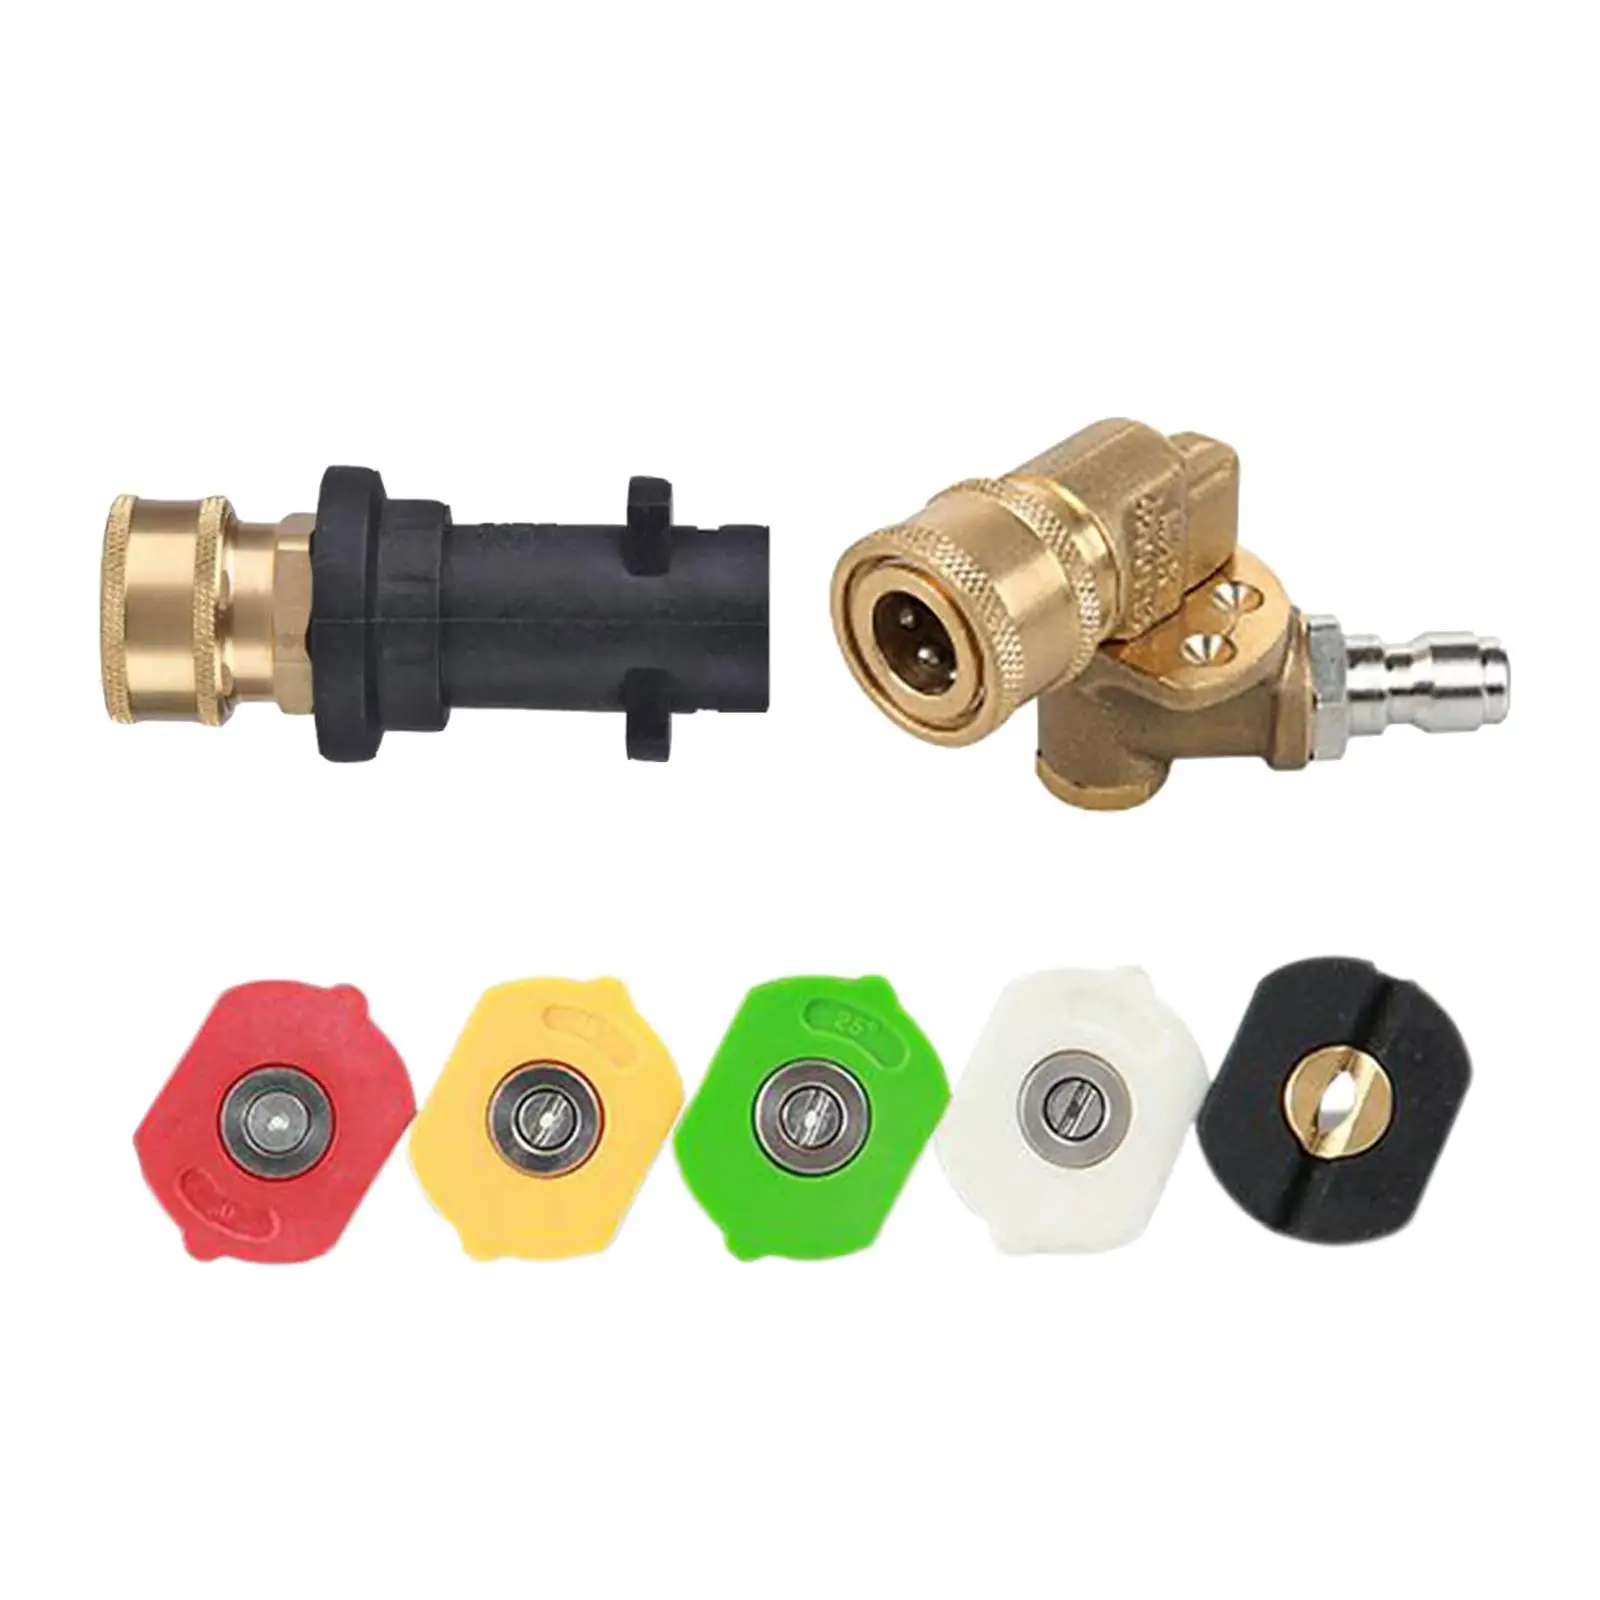 

Pressure Washer Adapter Set 1/4in Quick Connect Fitting Set 7 Gear Connector 5000PSI Pressure for Plant Watering Car Washing